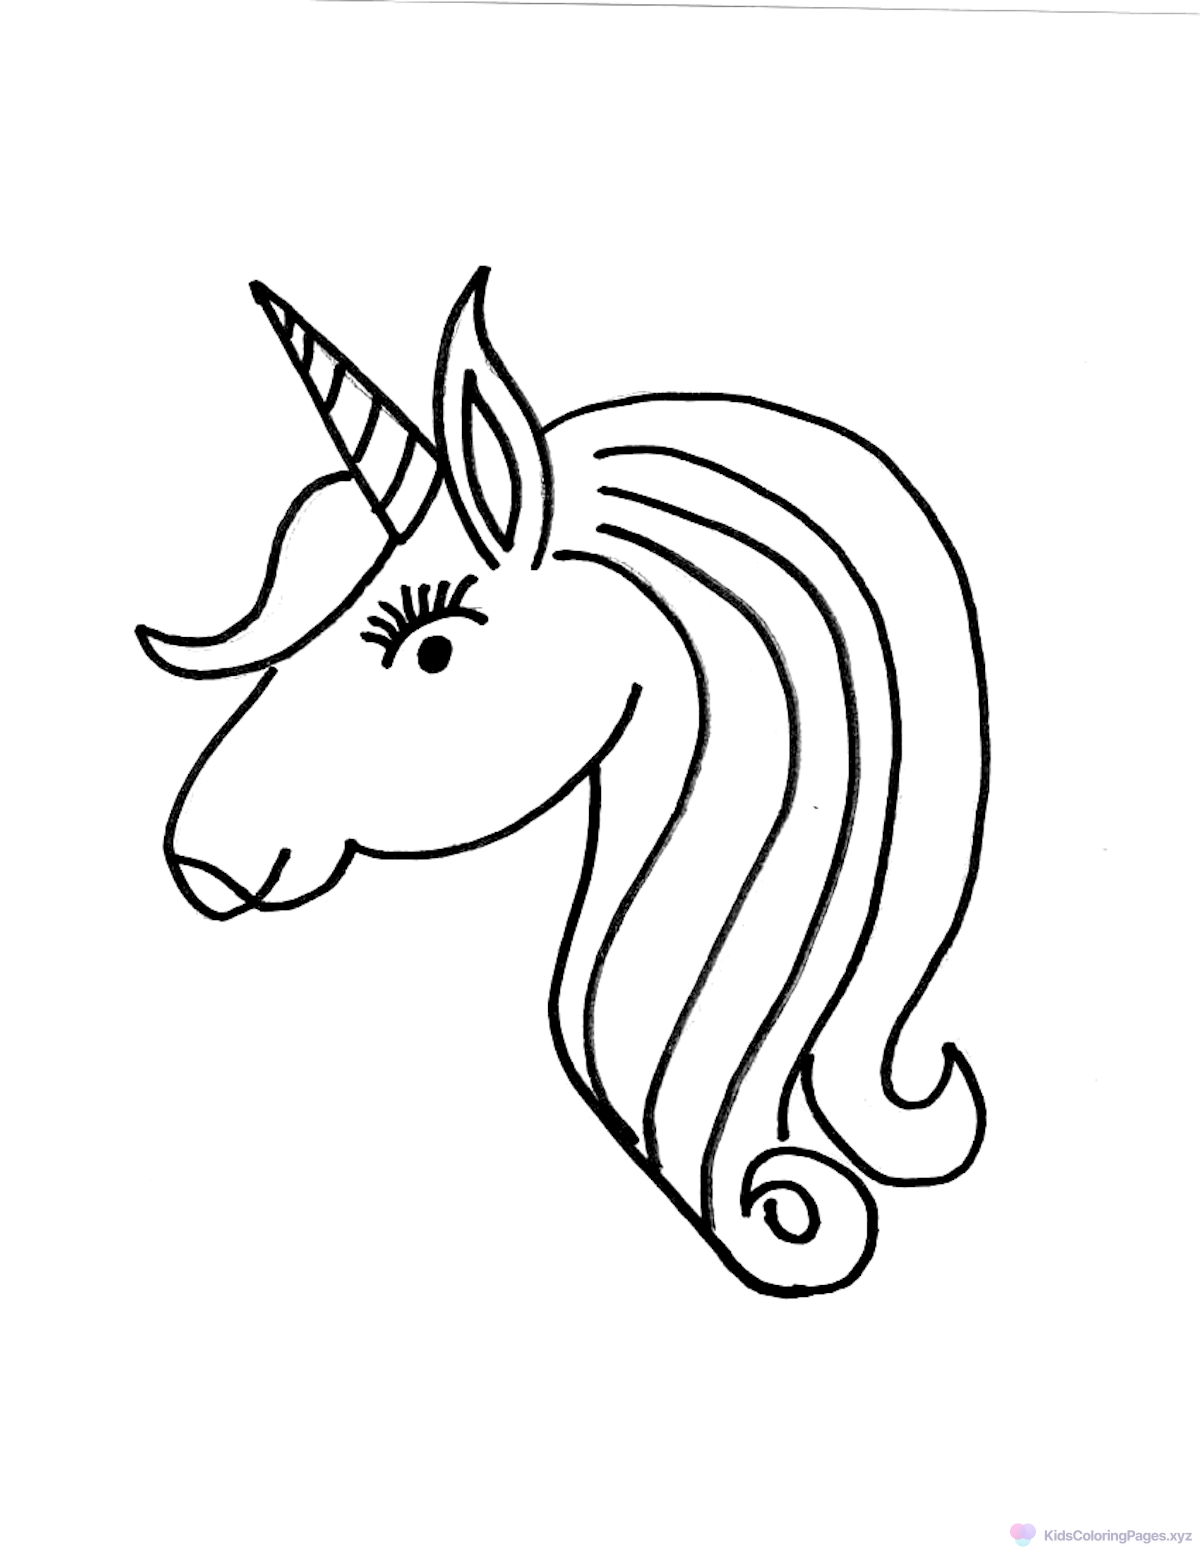 Sparkling Unicorn coloring page for printing